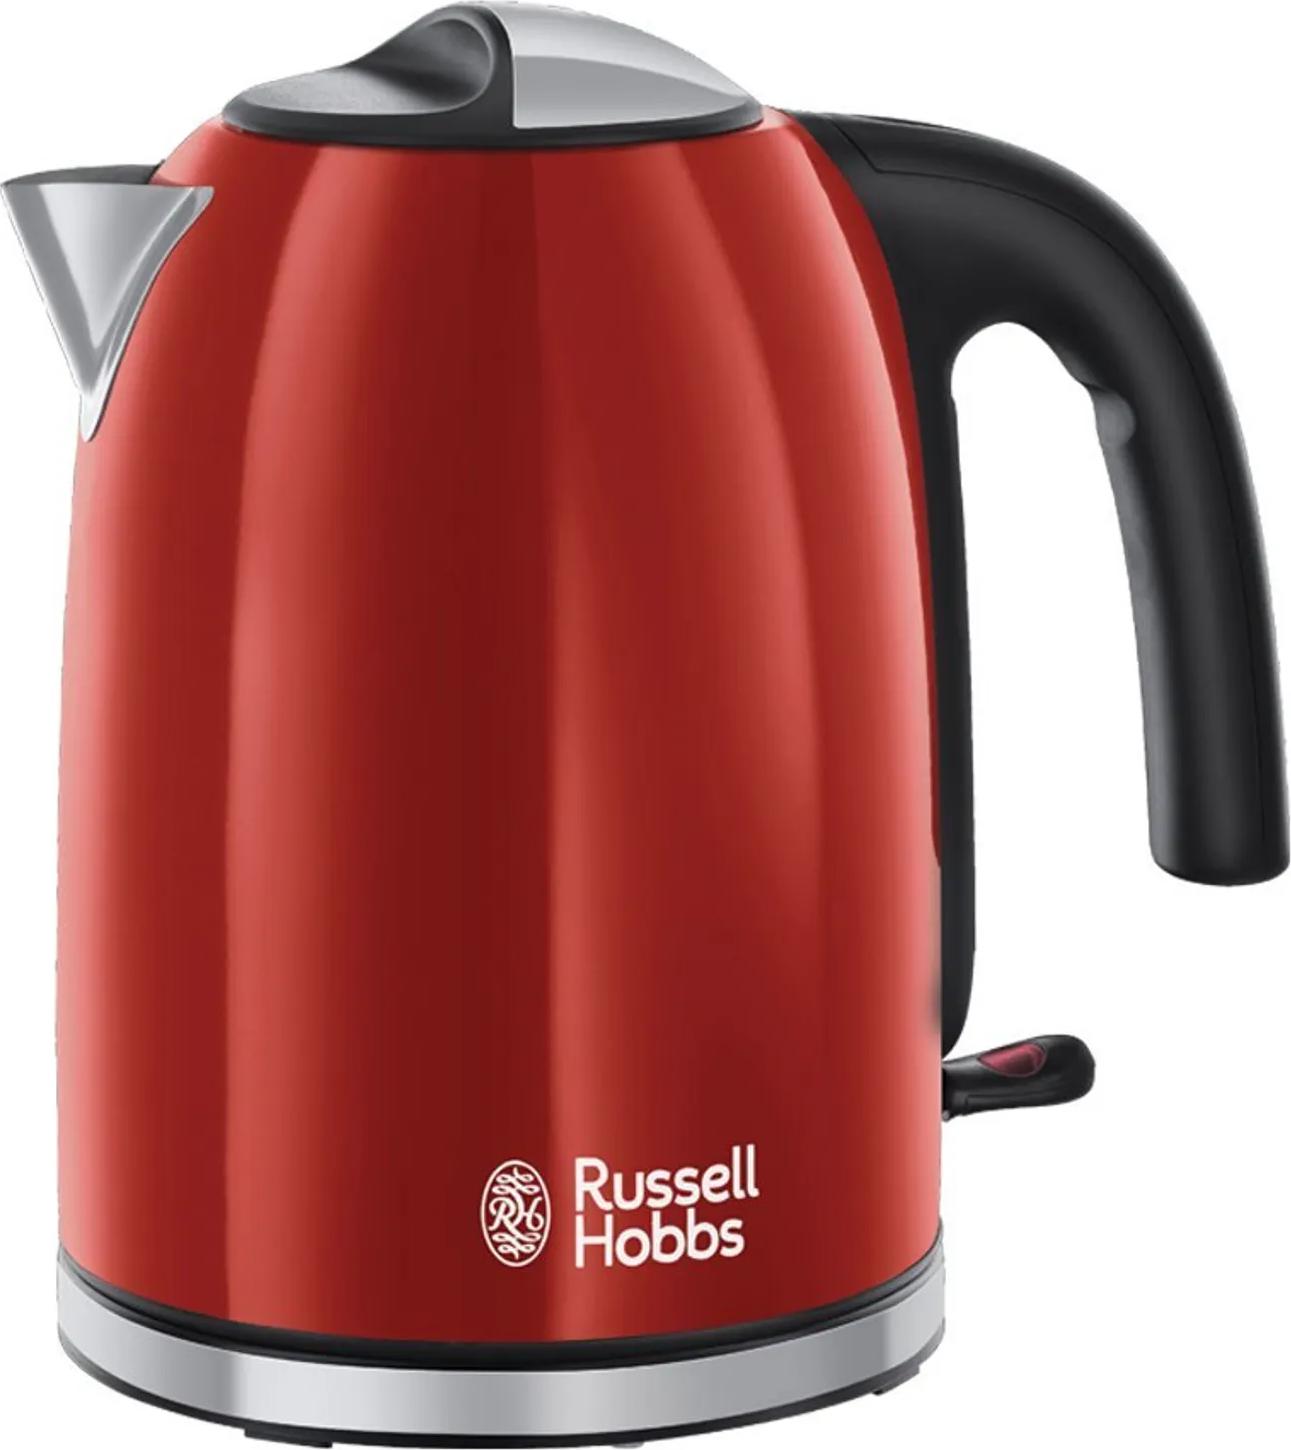 Russell Hobbs BOUILLOIRE ROUGE 20412-70 